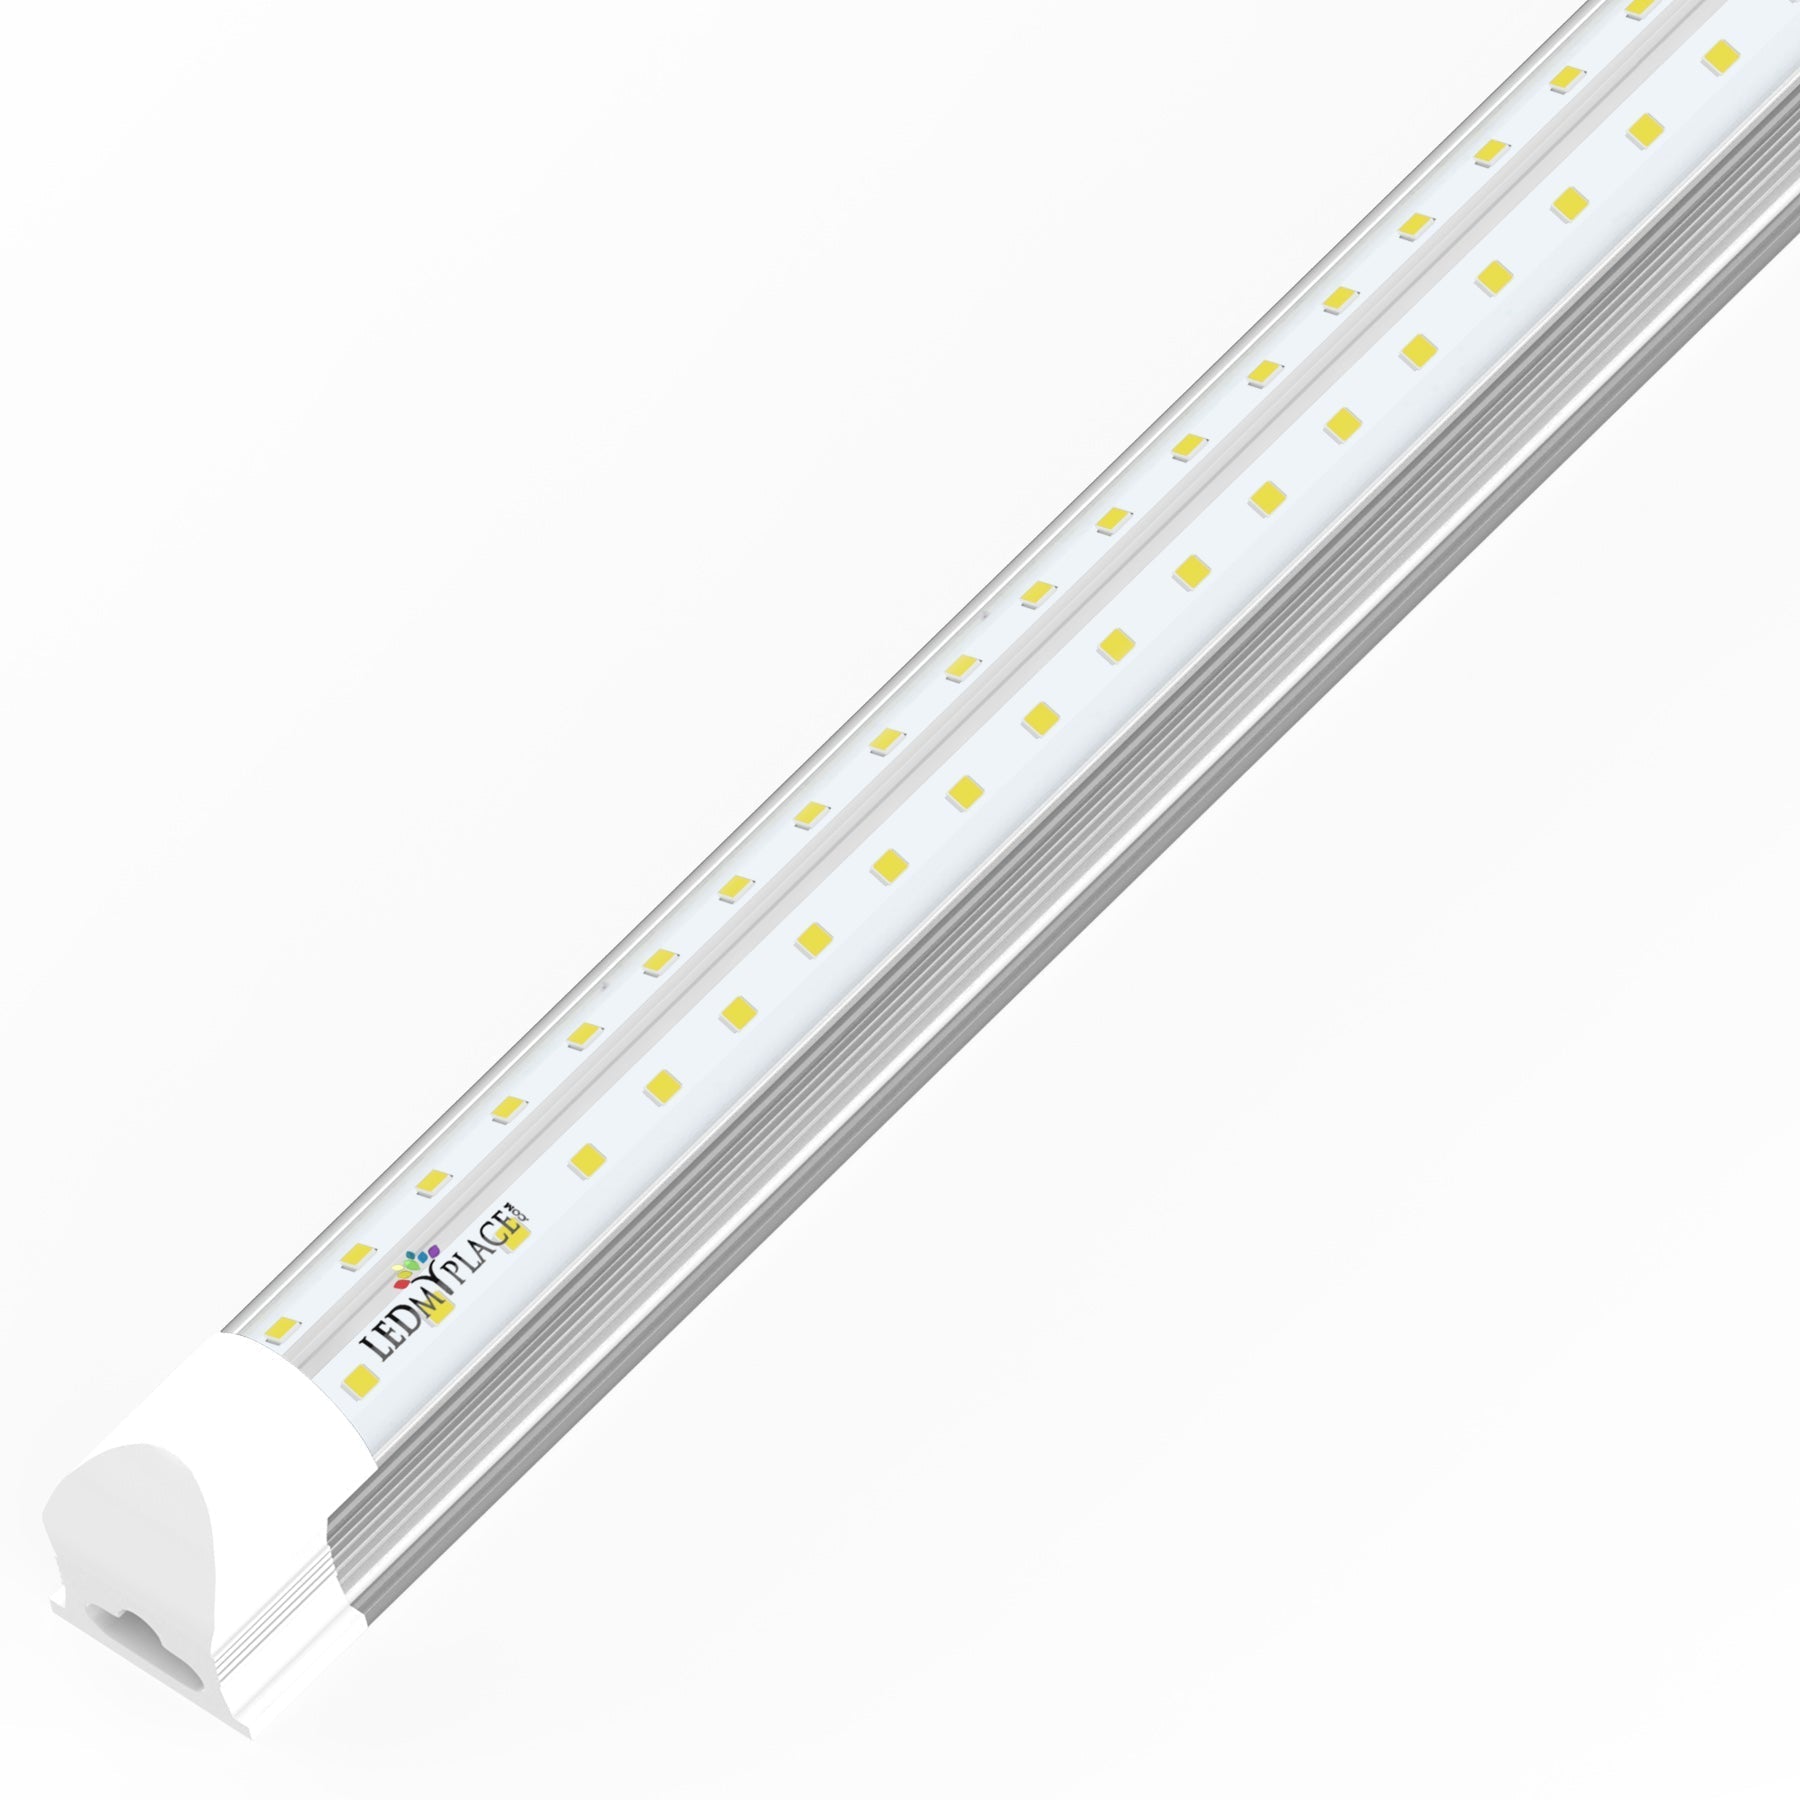 4ft Integrated 30W LED Tube Light Fixture - 3900Lm - 6500k Clear Cover - Double Side V-Shape - Plug and Play